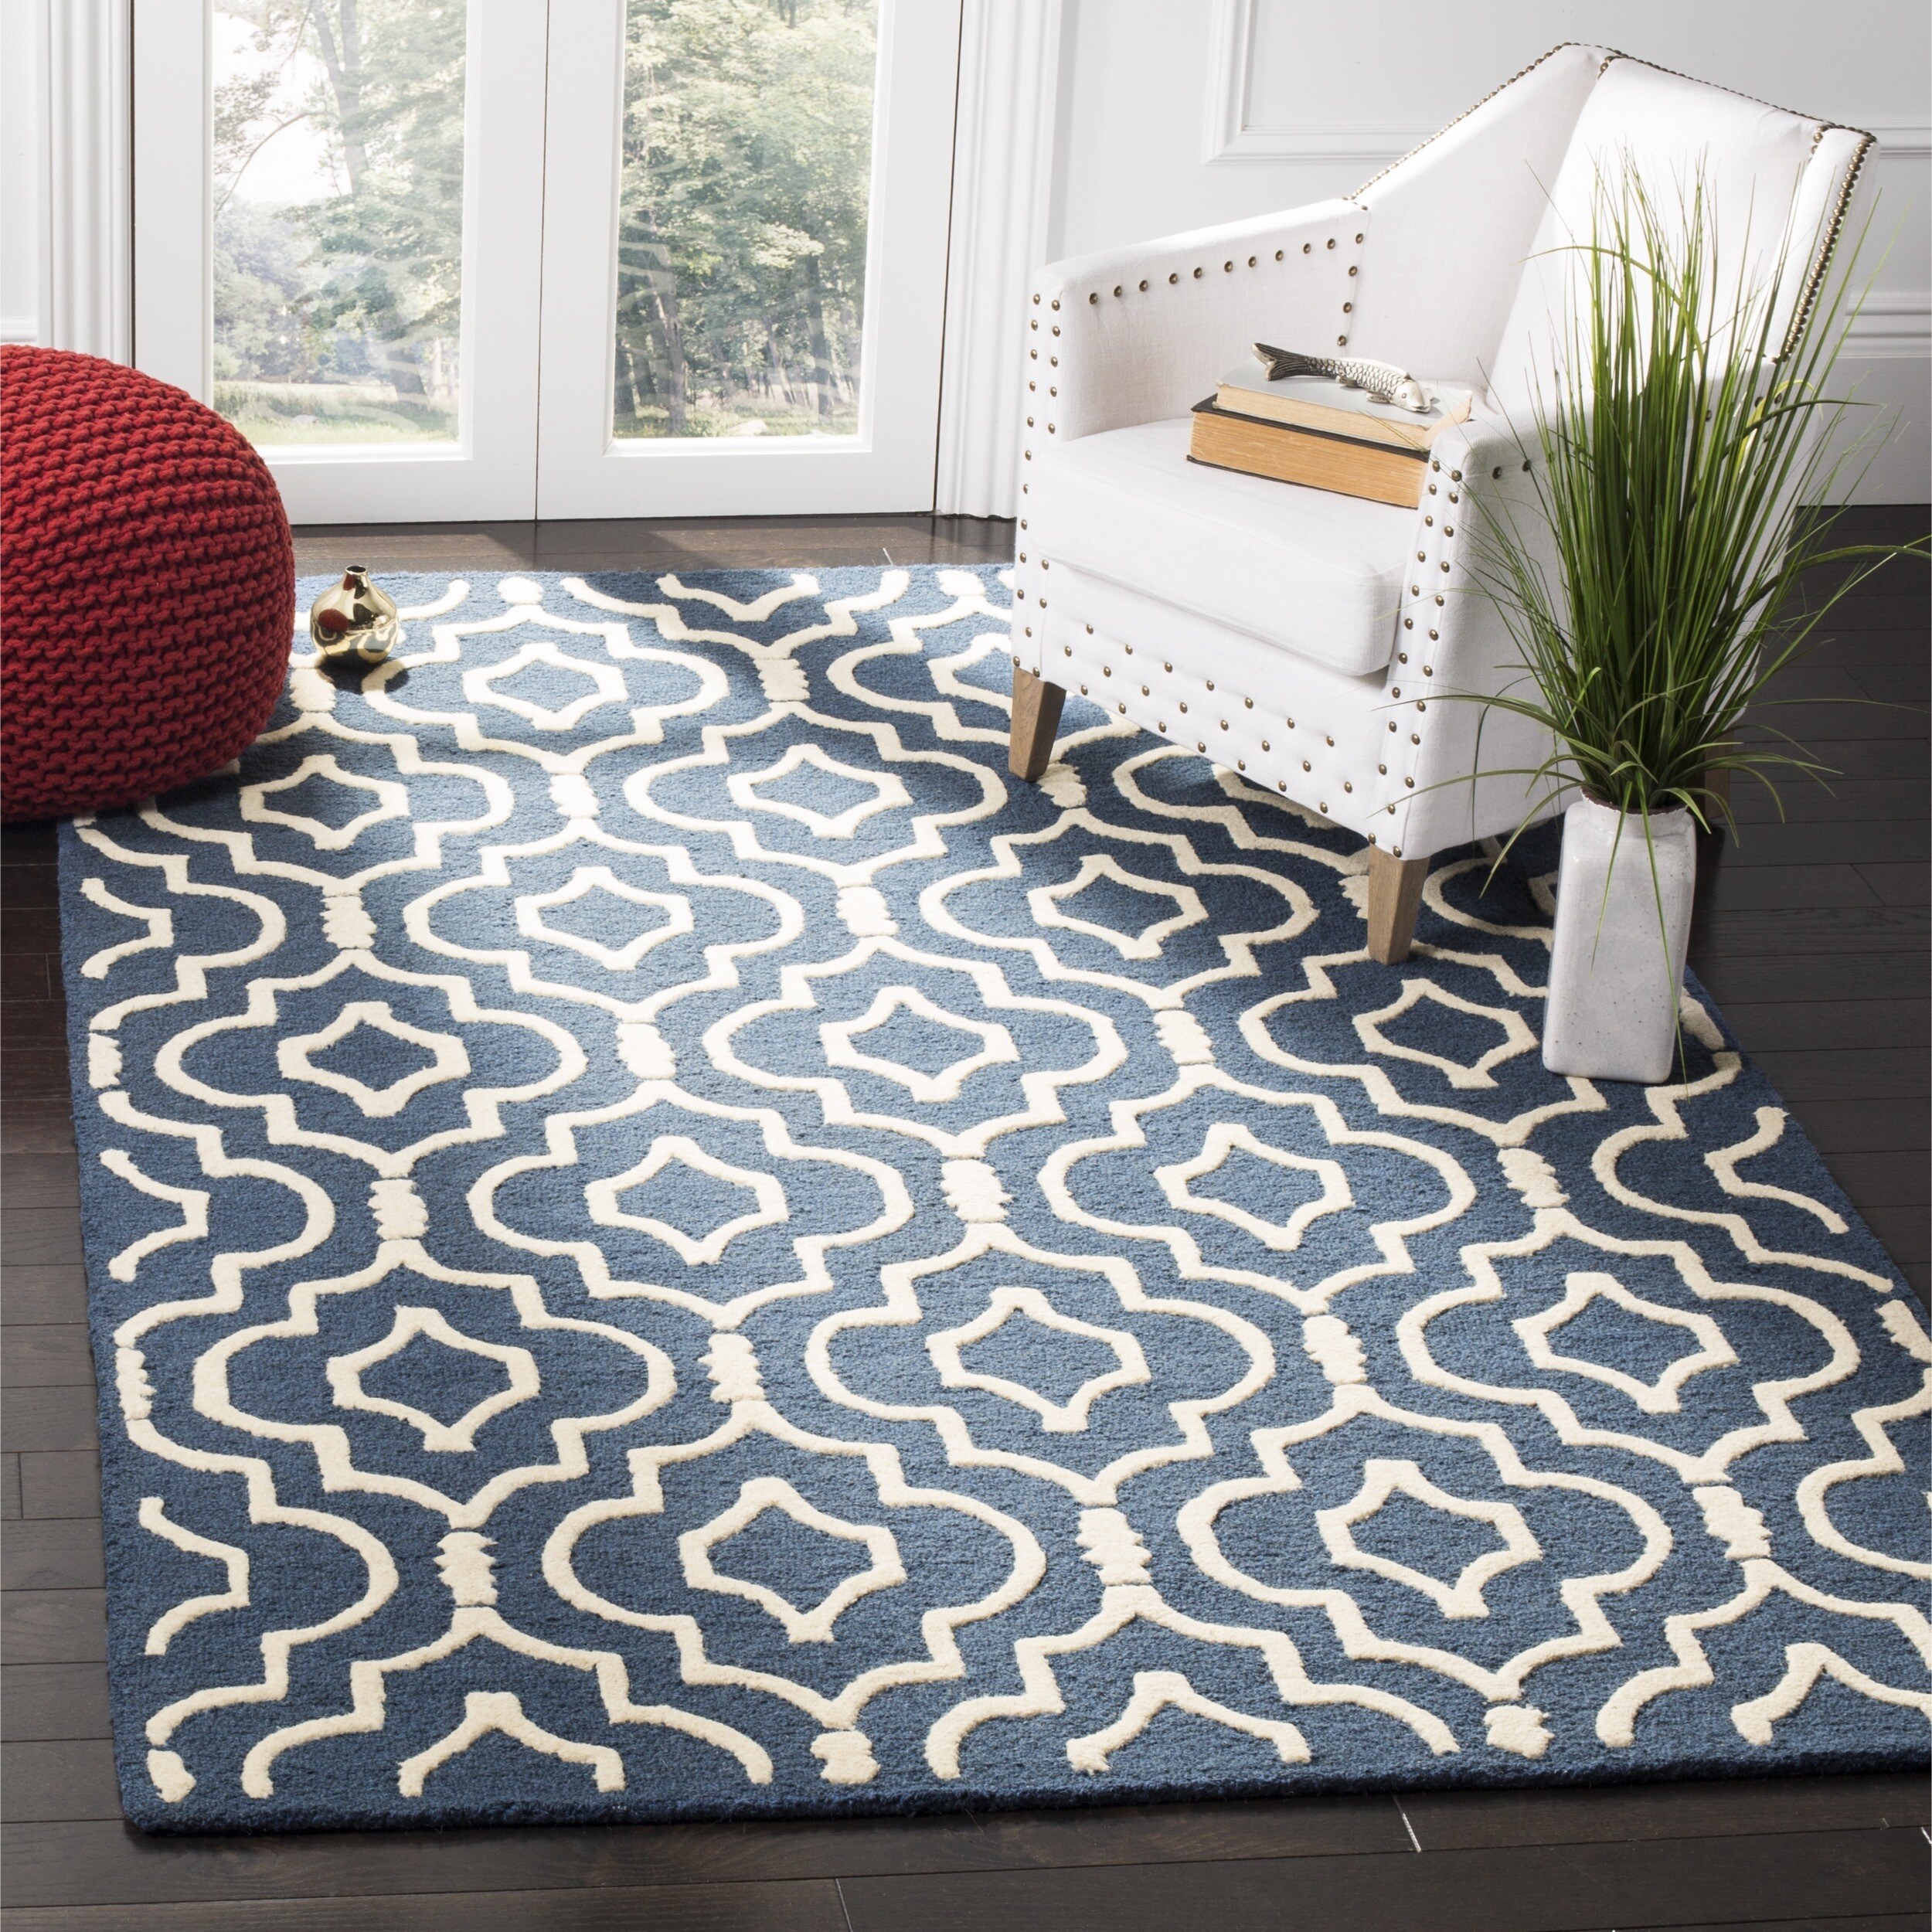 Safavieh Handmade Moroccan Cambridge Navy/ Ivory Wool Rug With 0.5 inch Pile Height (6 Square)